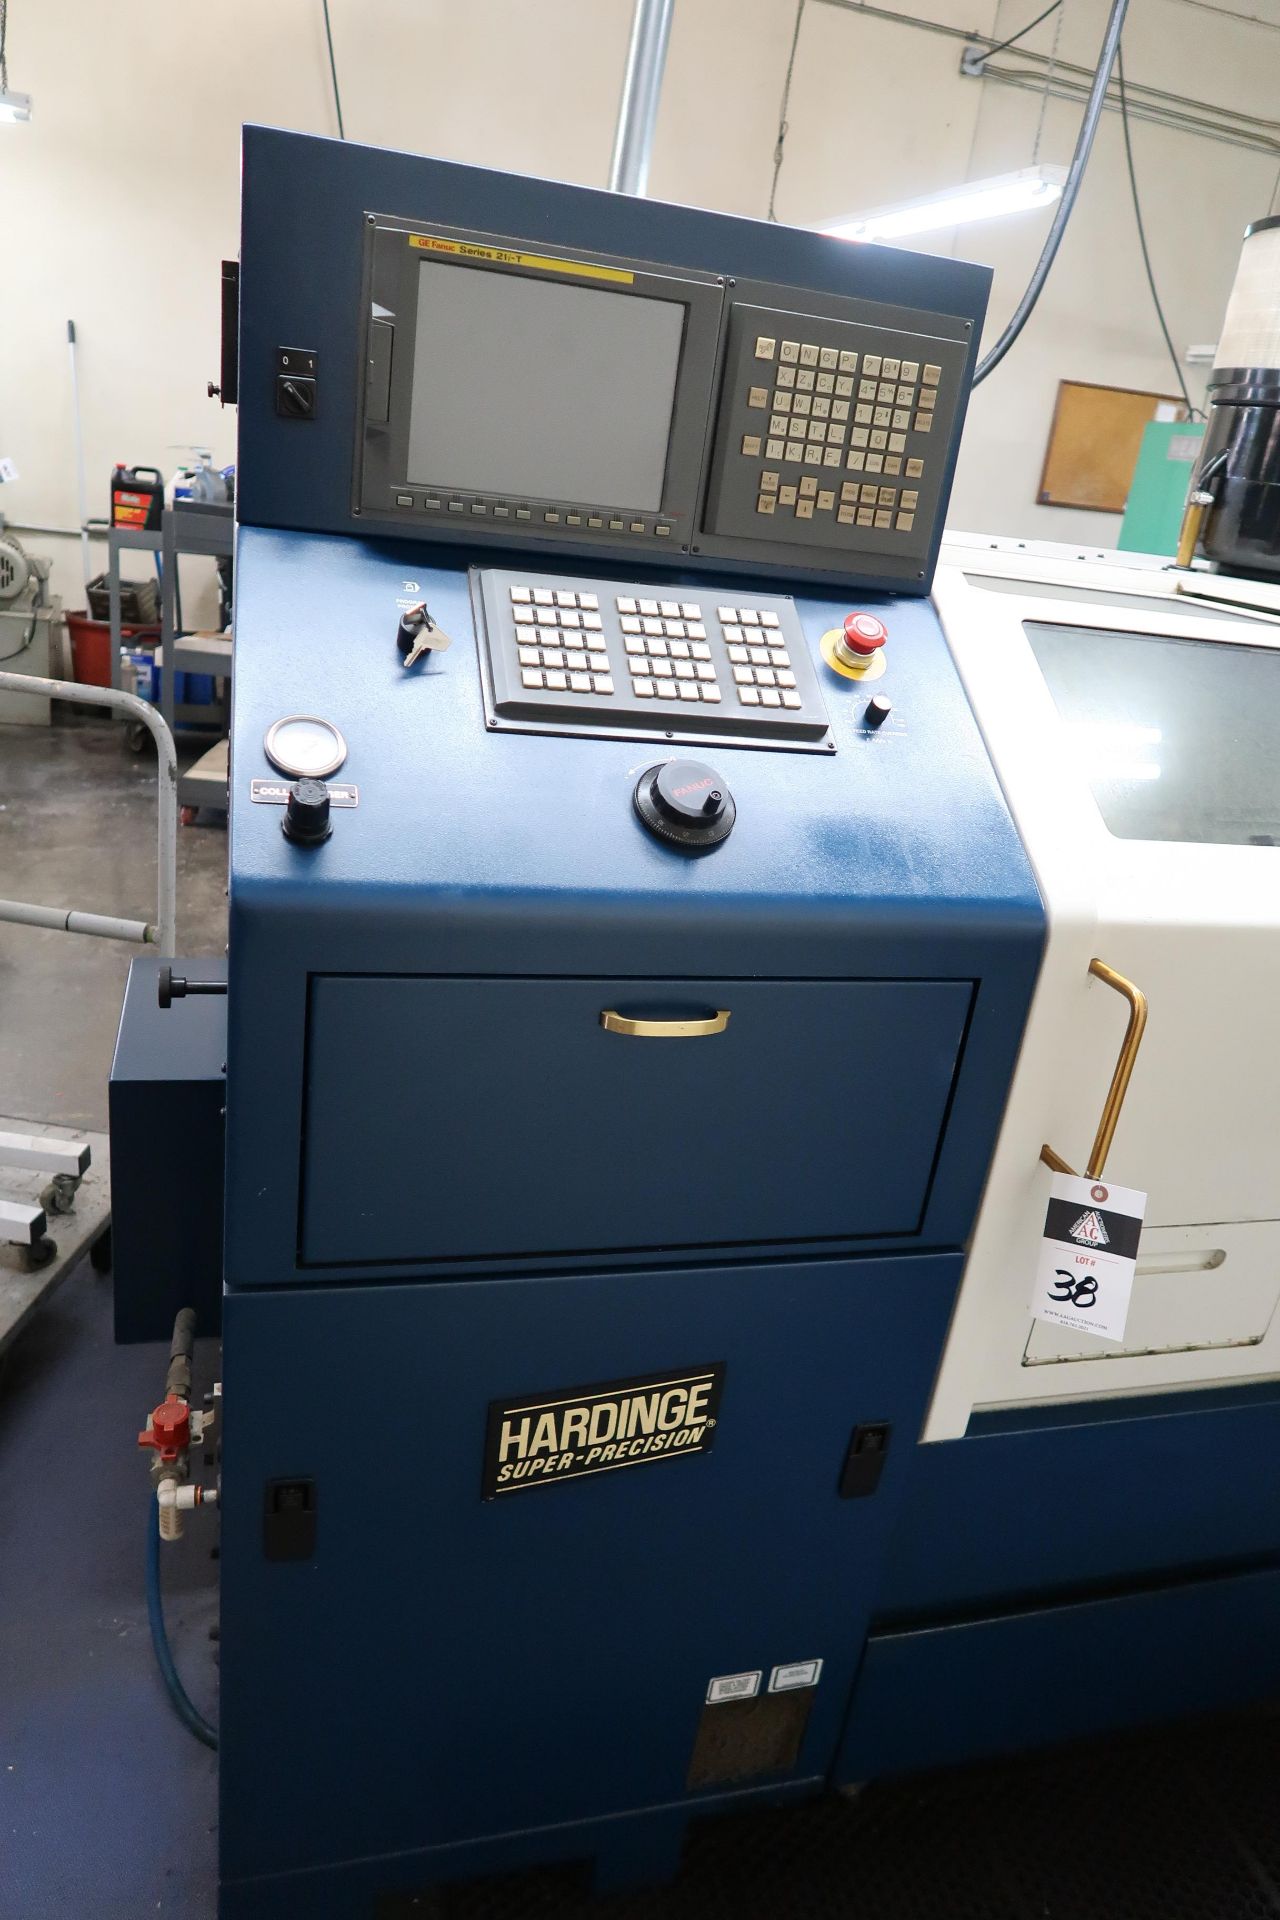 2003 Hardinge mdl. MG Conquest GT27 SP CNC Cross Slide Gang Tool lathe s/n MG-102 SOLD AS IS - Image 3 of 21